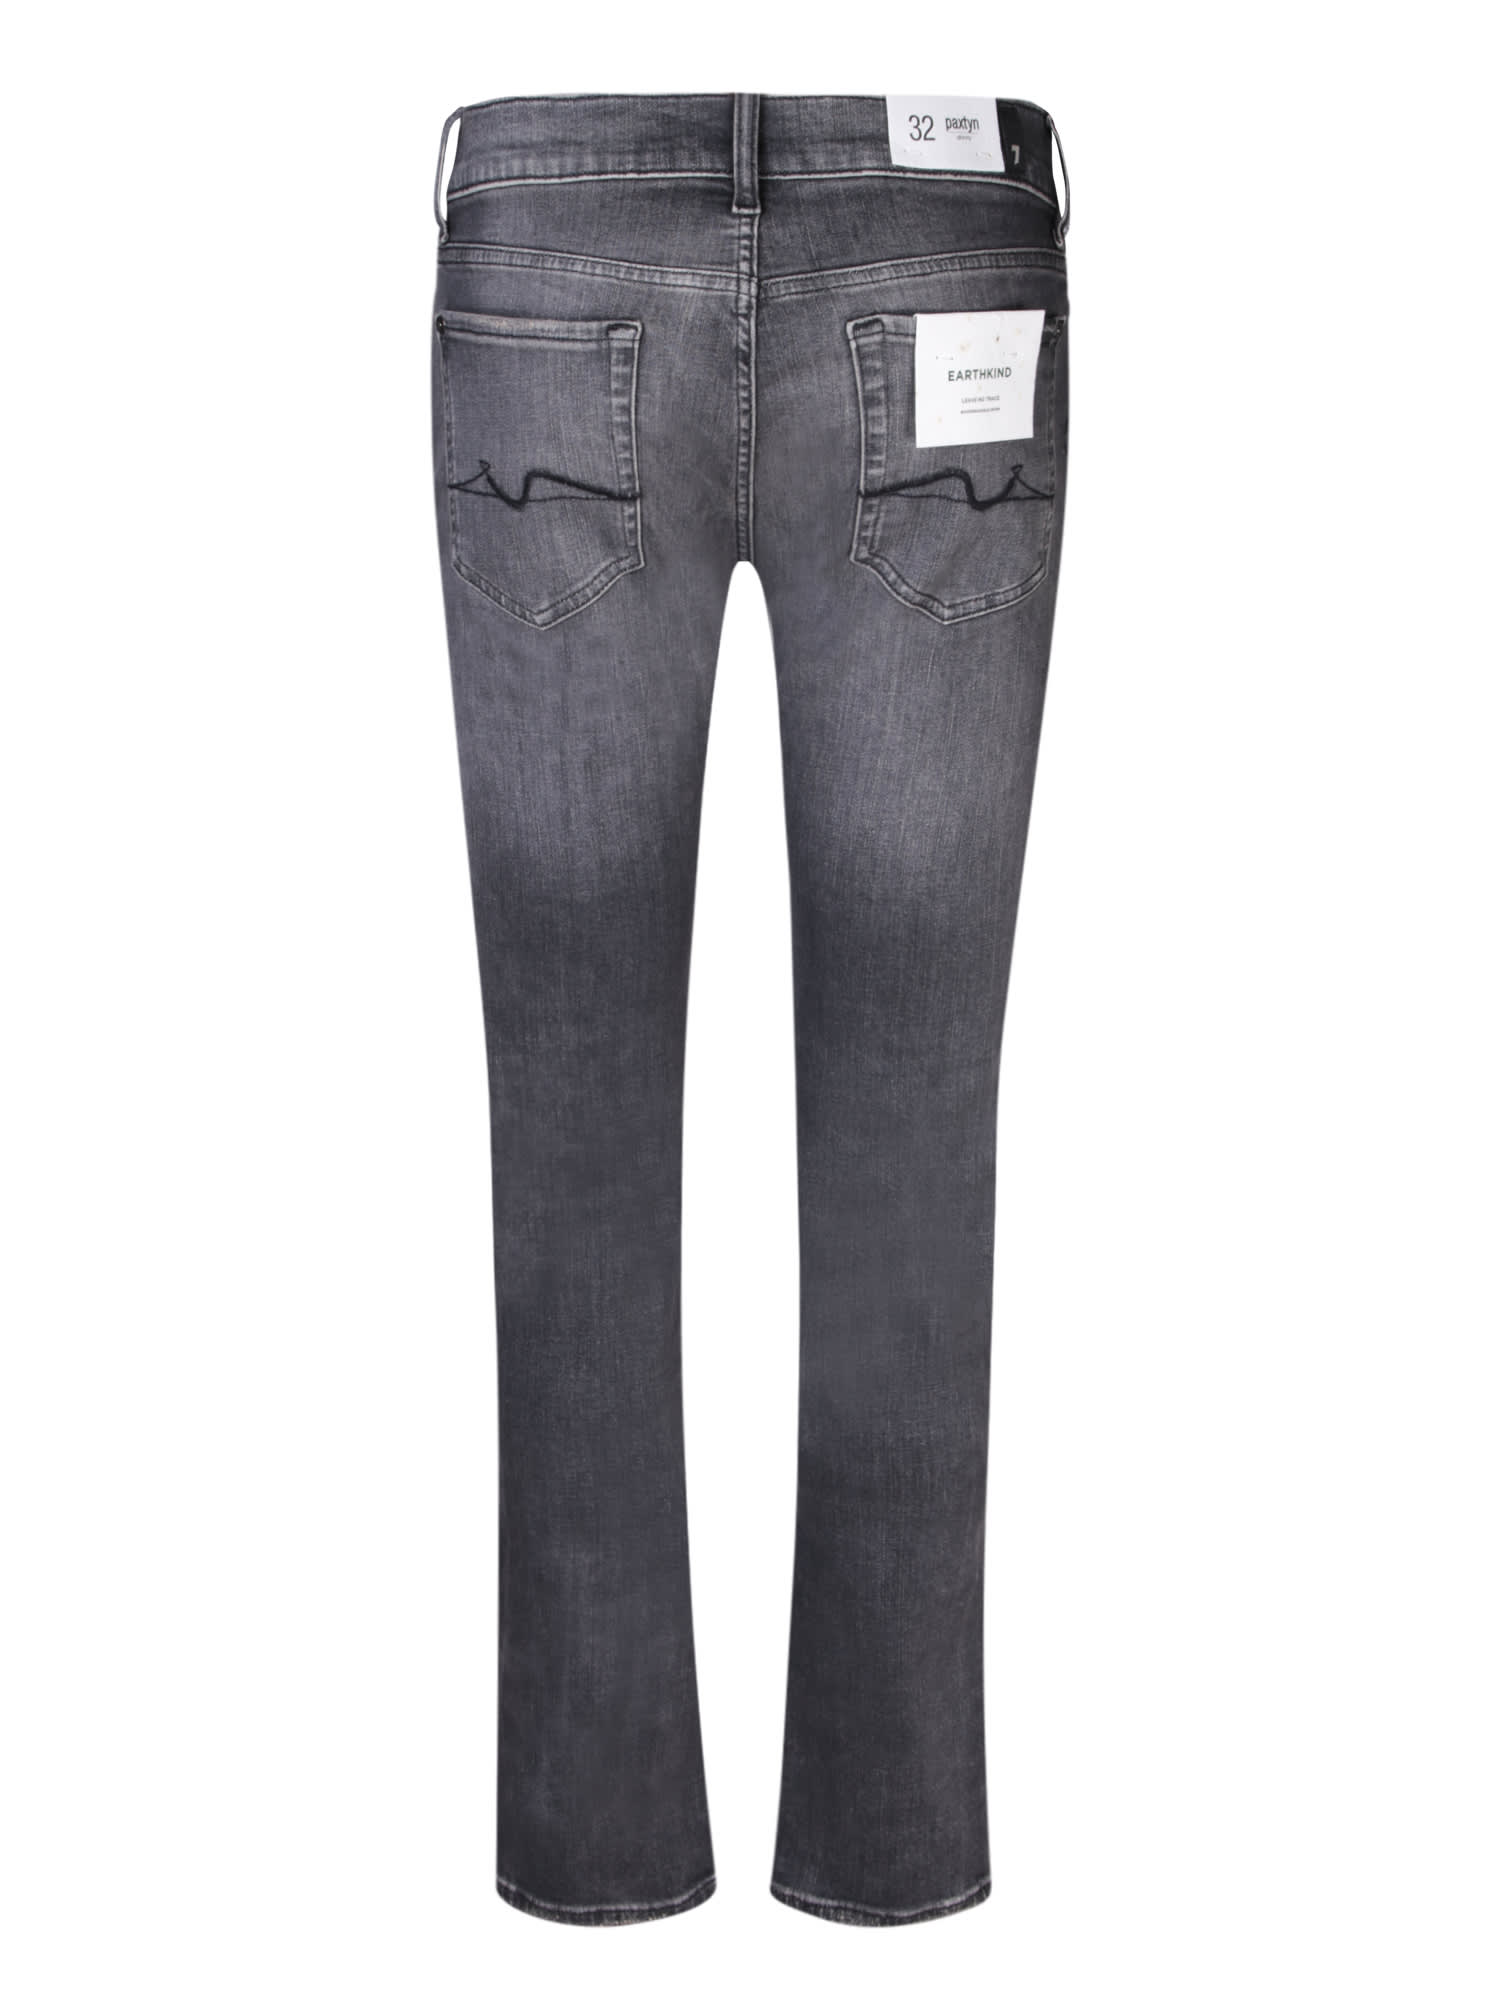 Shop 7 For All Mankind Slimmy Tapered Black Jeans